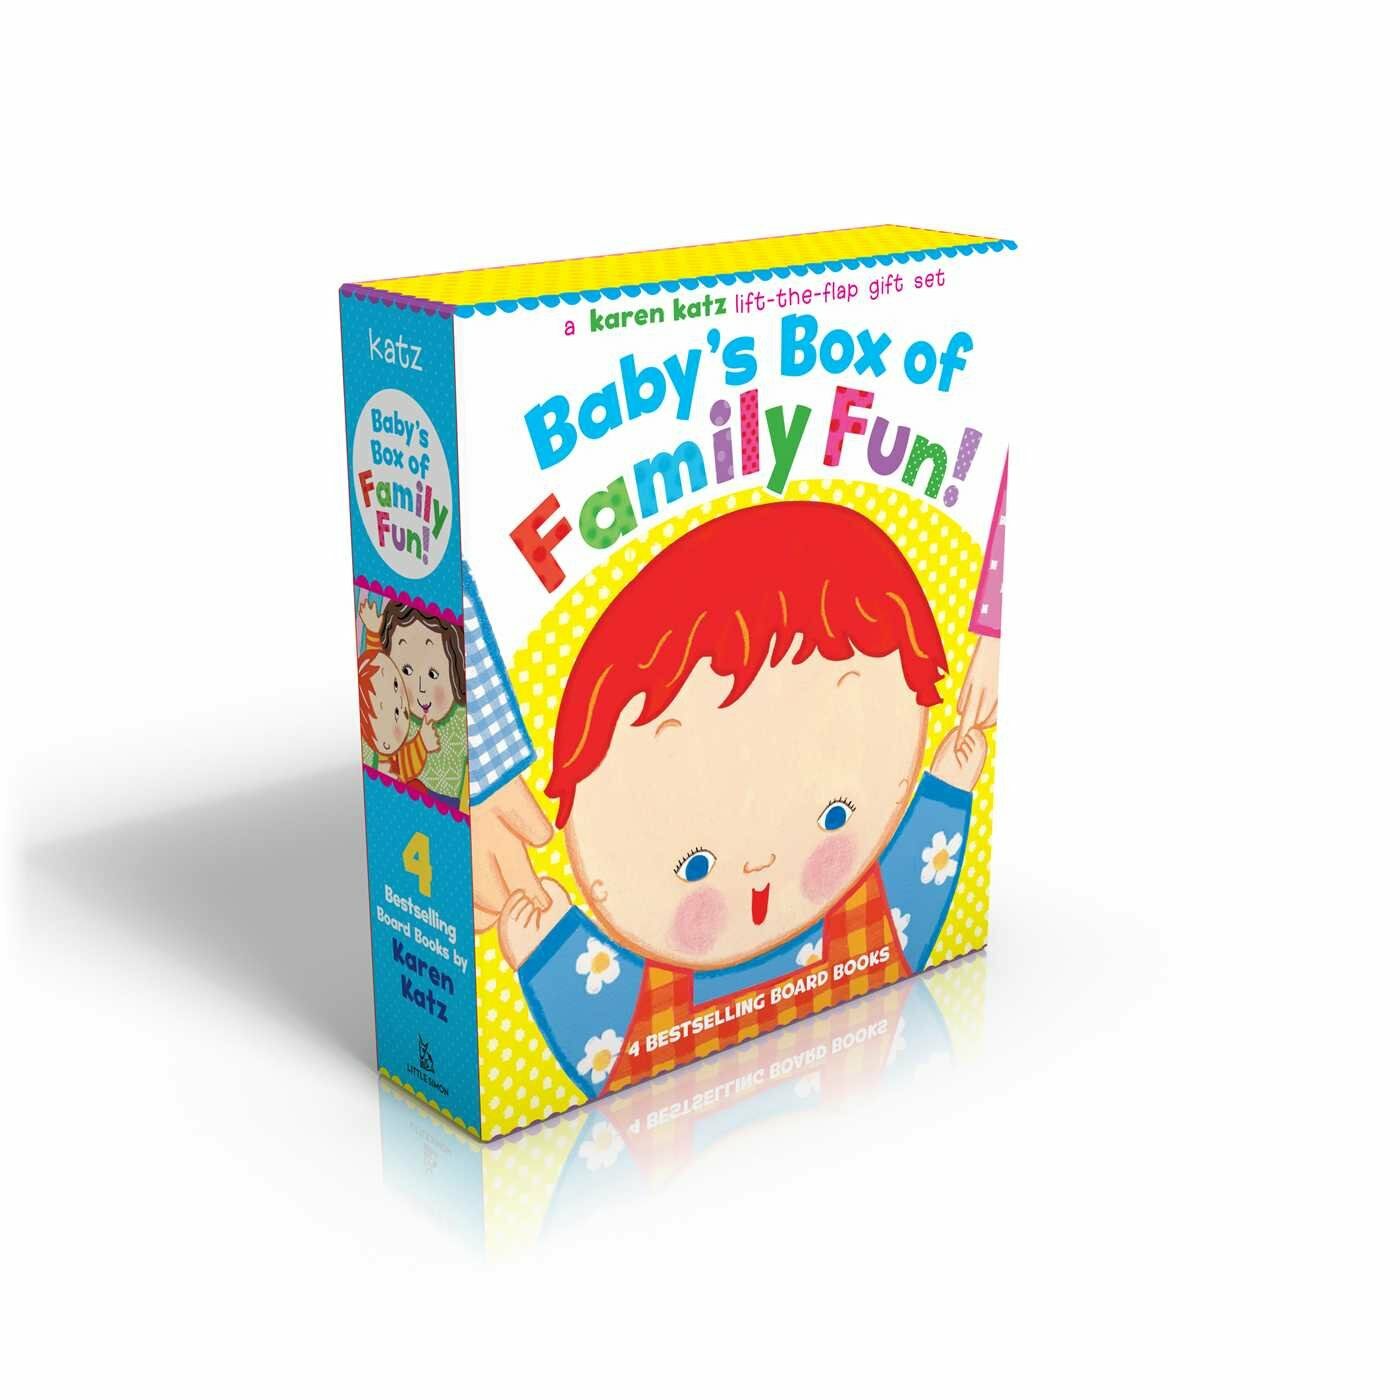 Babys Box of Family Fun! (Boxed Set): A 4-Book Lift-The-Flap Gift Set: Where Is Babys Mommy?; Daddy and Me; Grandpa and Me, Grandma and Me (Boxed Set, Boxed Set)